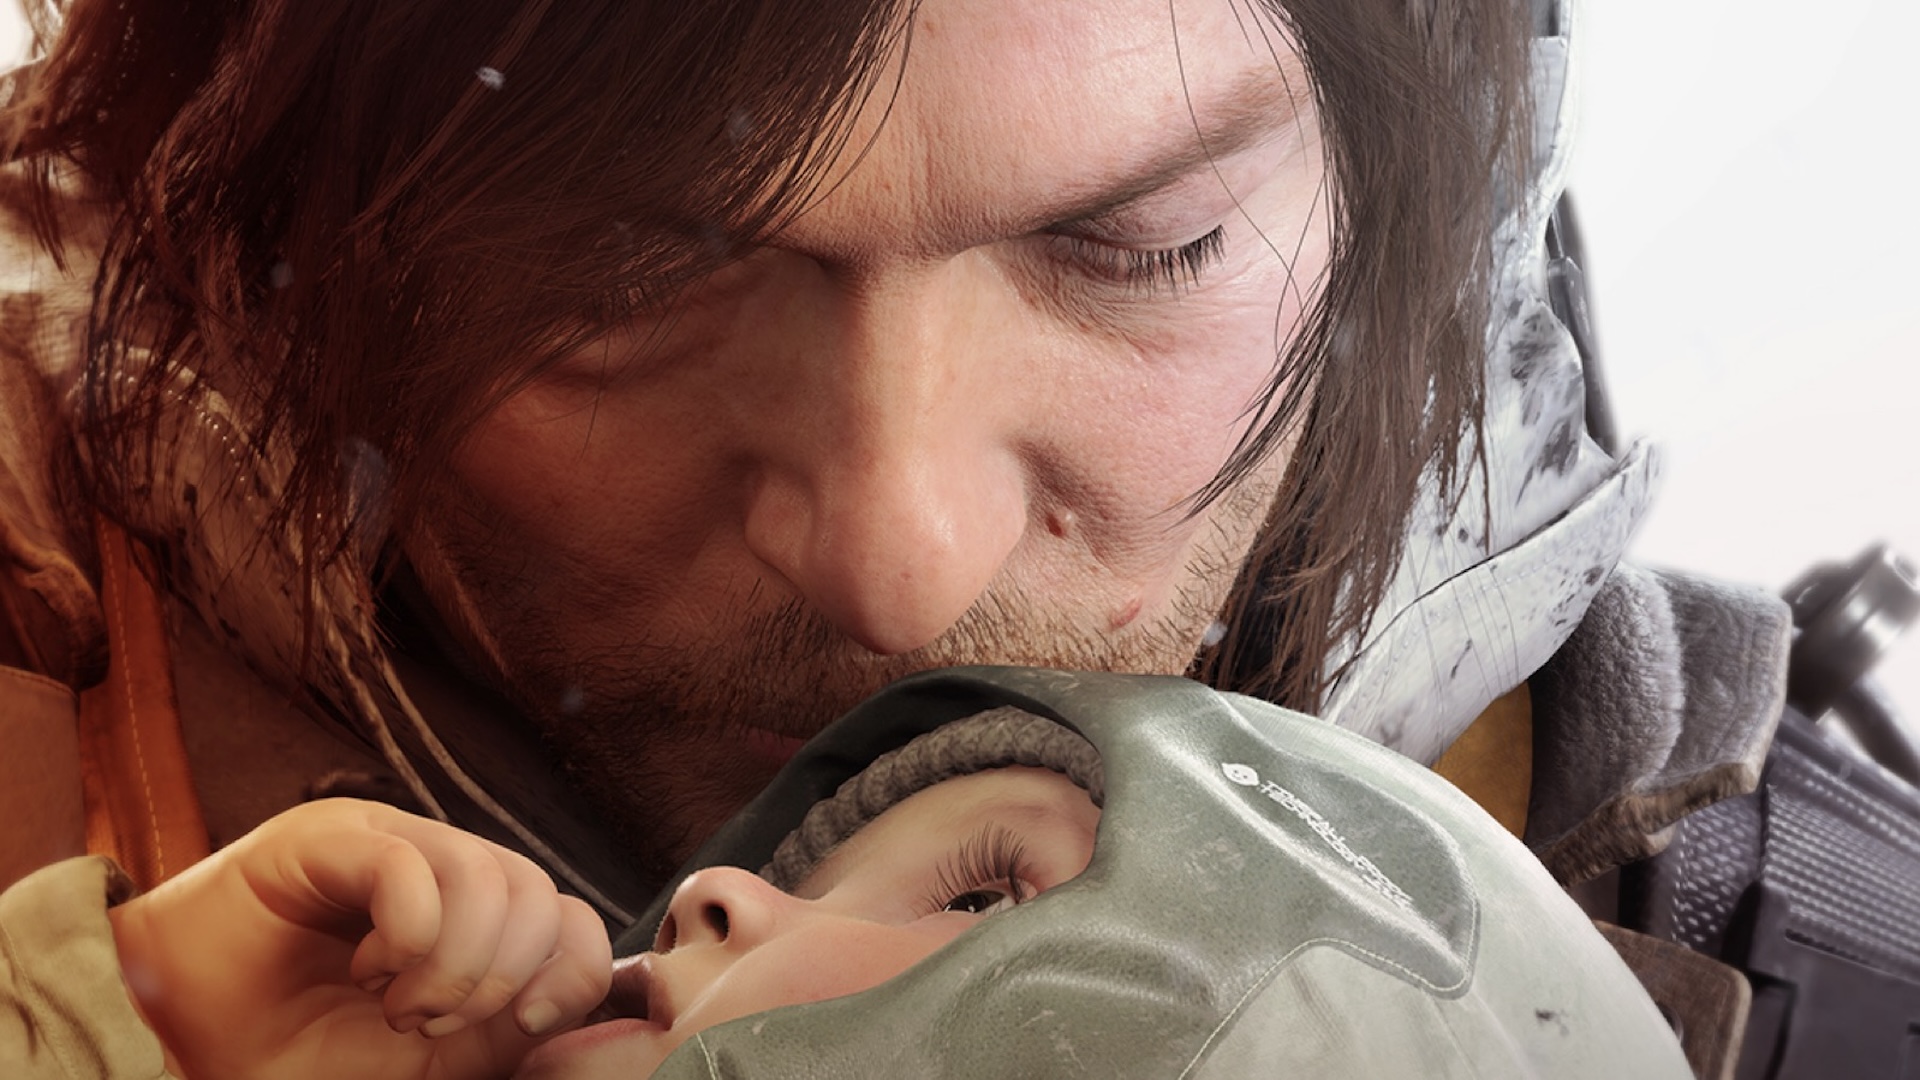 Death Stranding 2, Release date speculation, trailer and latest news